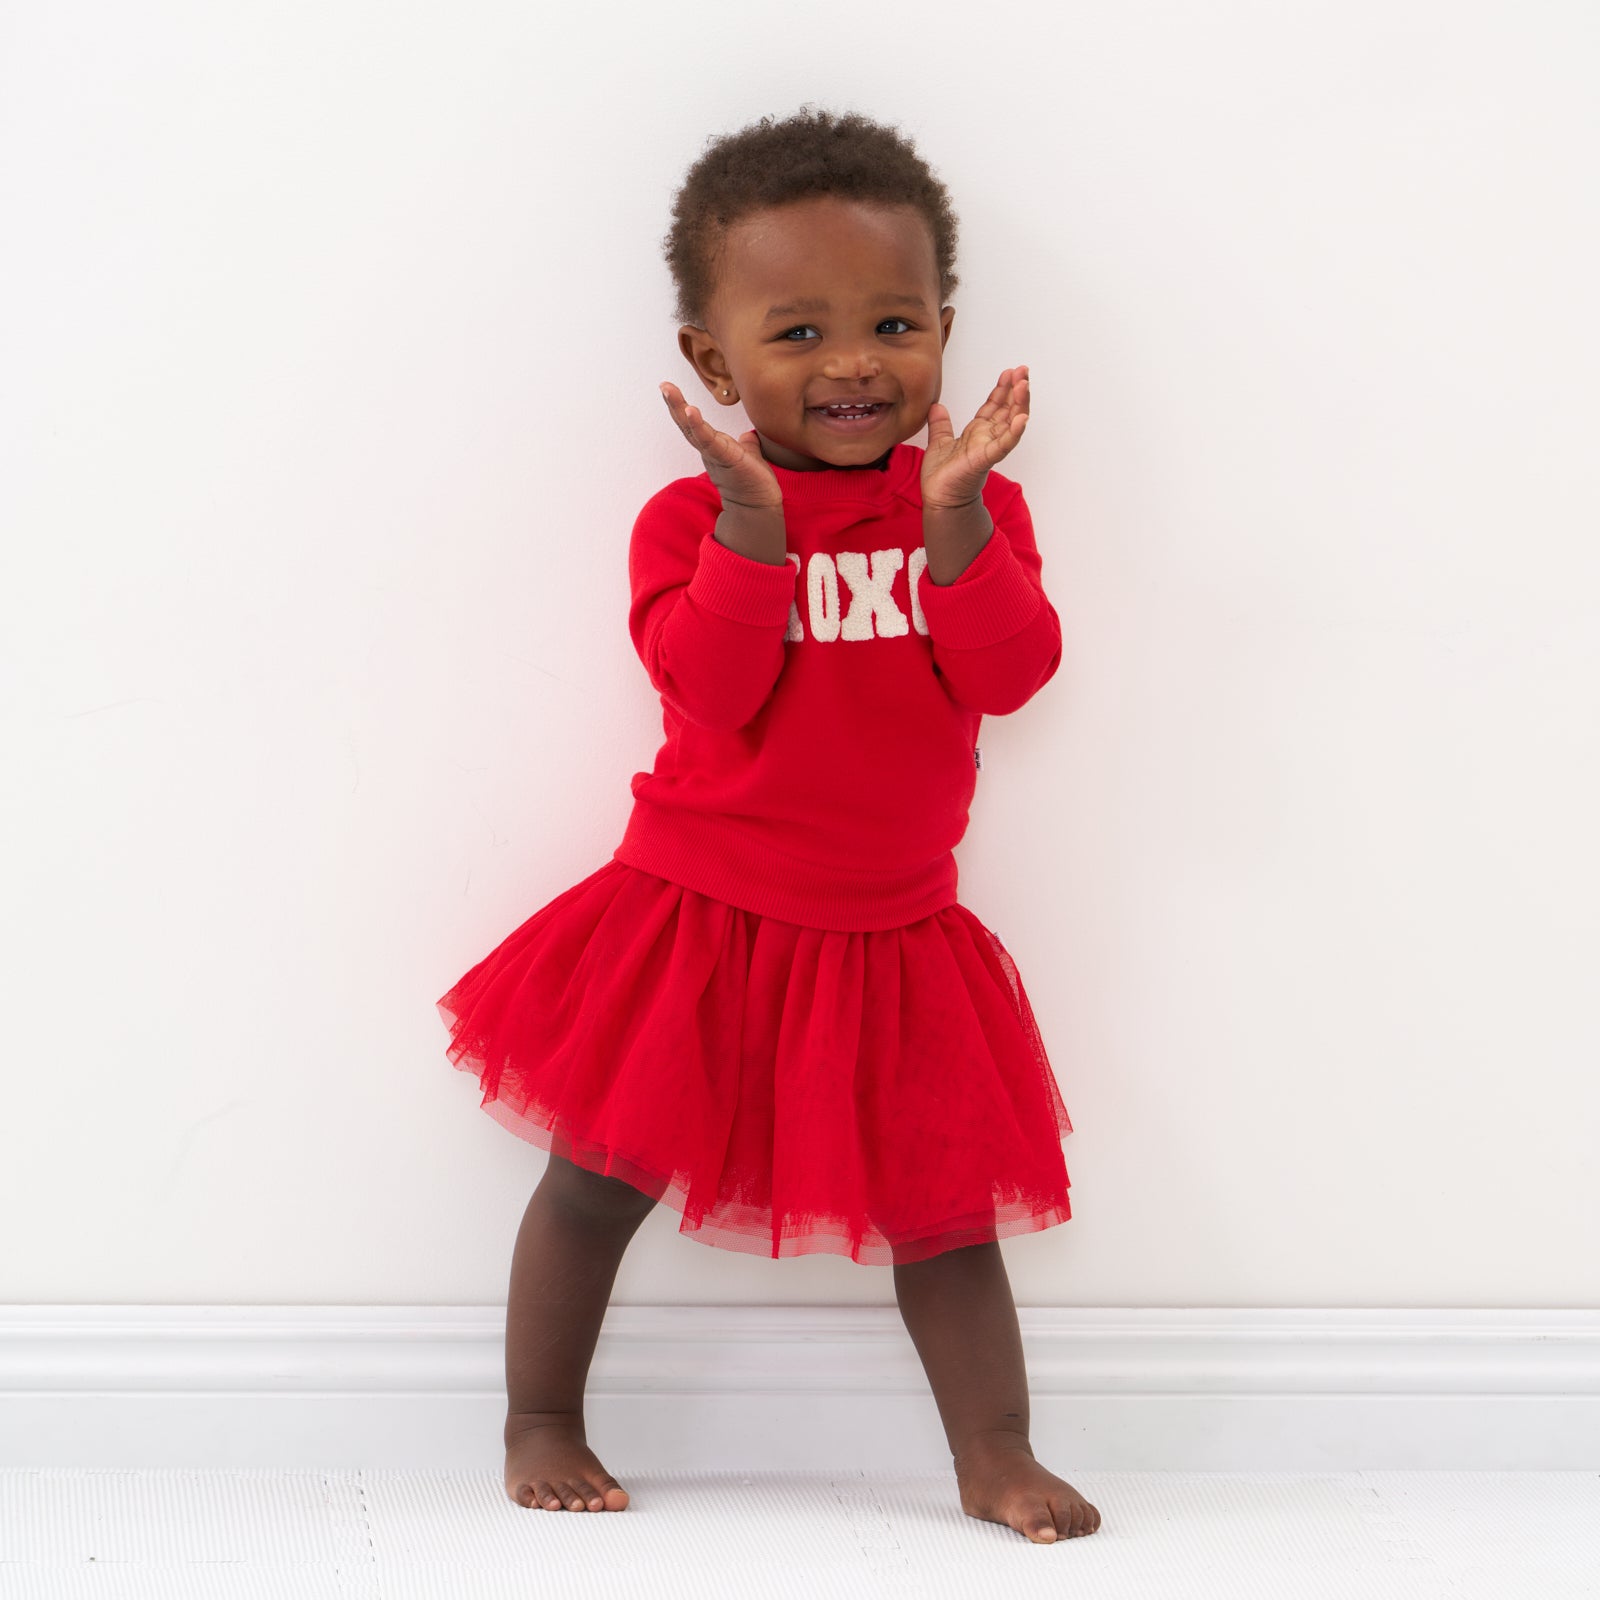 Child clapping her hands wearing a Candy Red tutu skirt and matching crewneck sweater